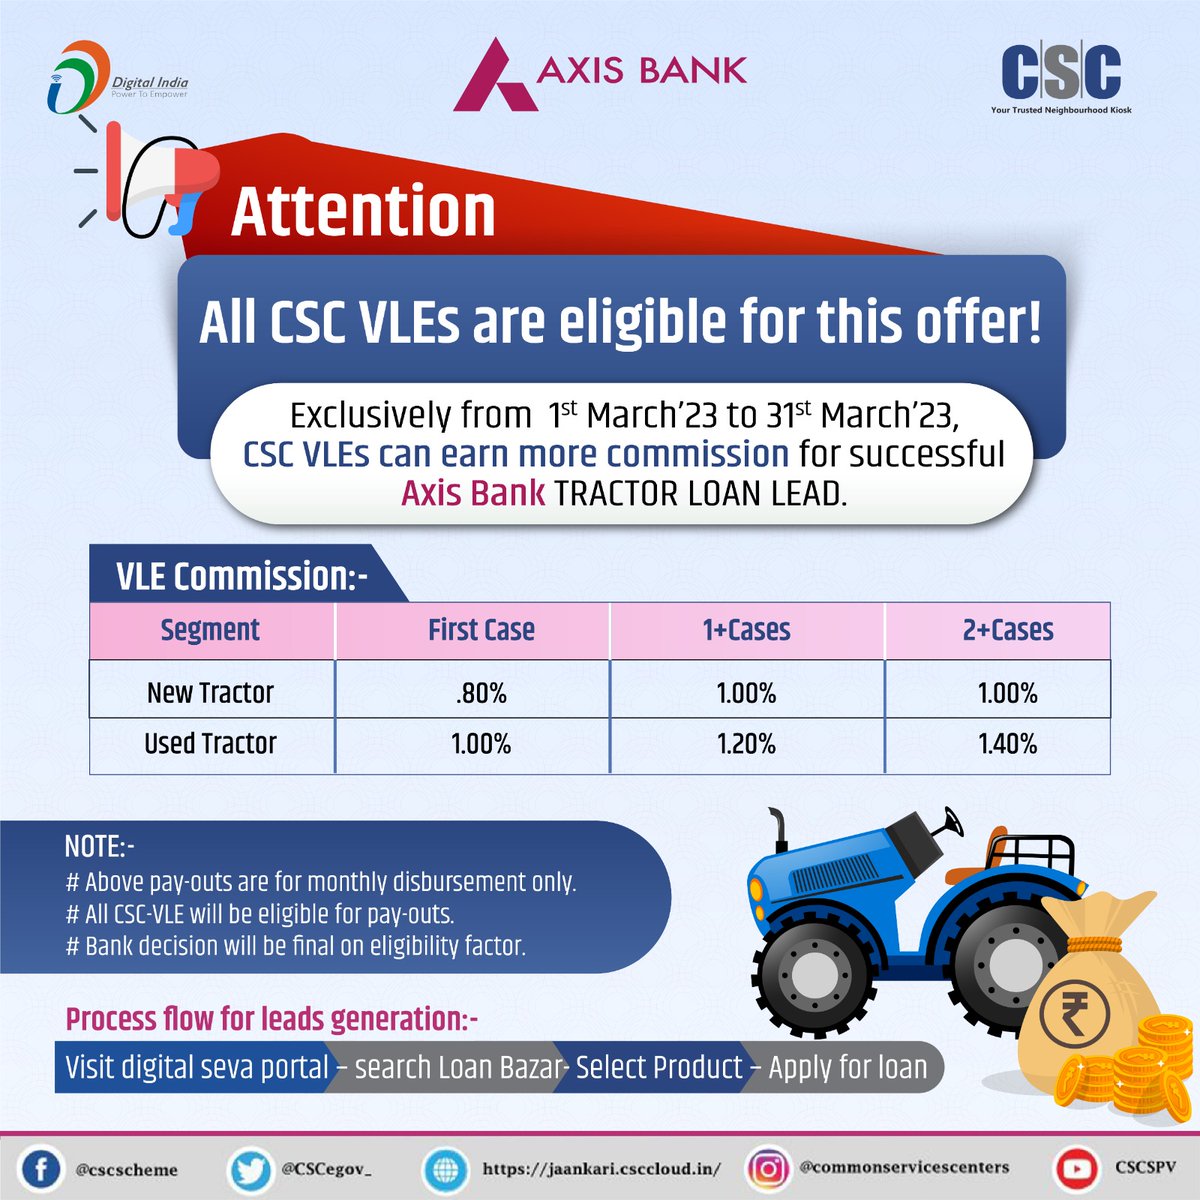 Attention!!! 📢

All #CSCVLEs can generate #AxisBankTractorleads and get extra commission on both used and #newtractorleads.

Start earning extra commissions today!

OFFER VALIDITY - 1st Mar'23 to 31st Mar'23
#cscfinancialservices #csc #digitalindia #axisbank #commission #loan